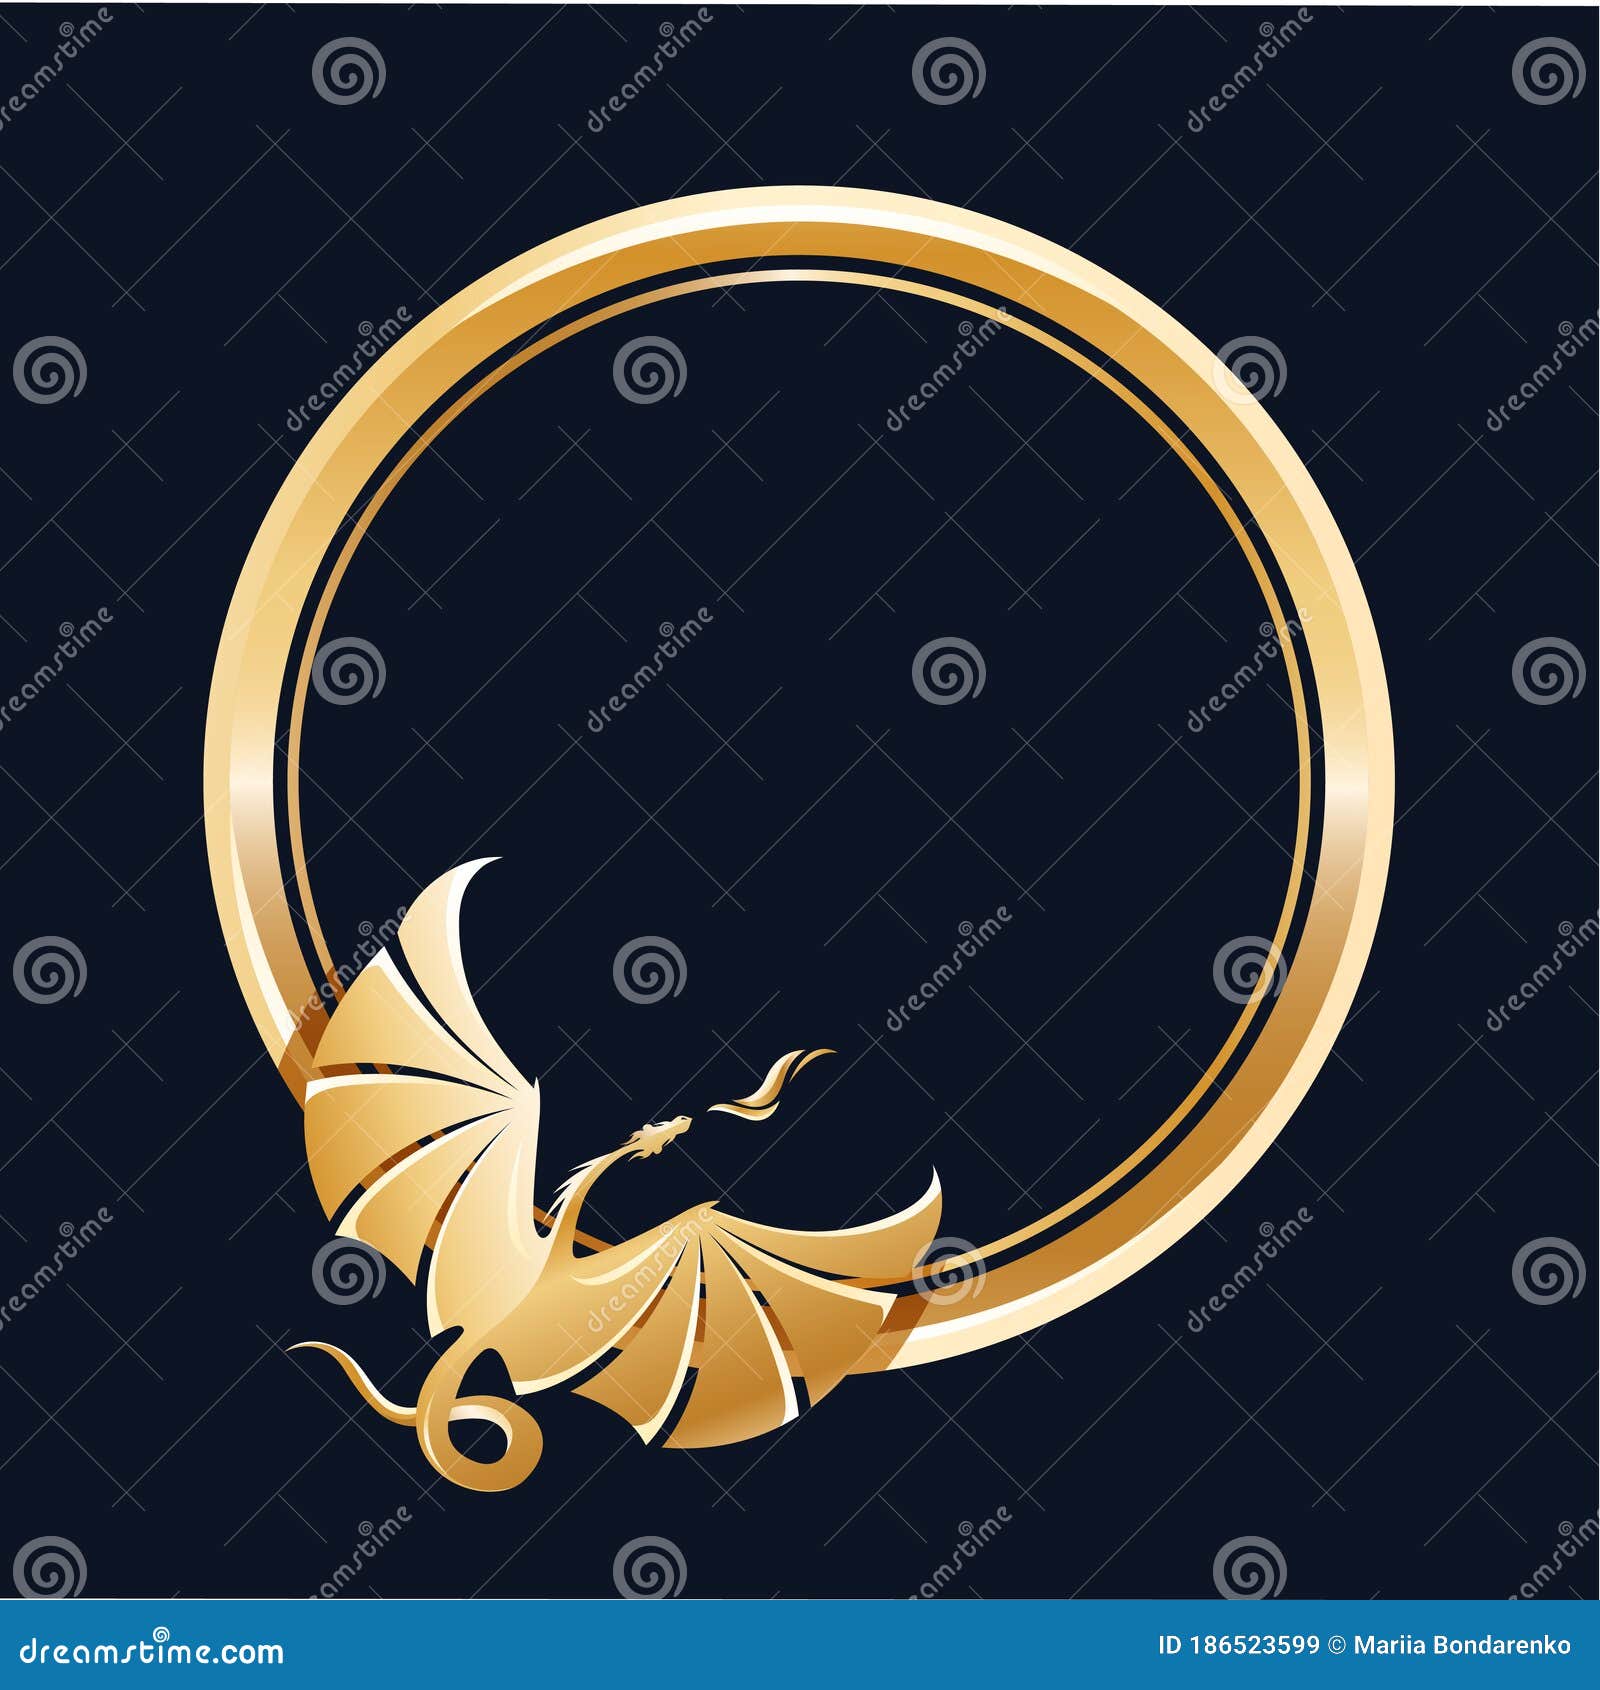 Circle Frame With Rising Flying Golden Dragon Breathing Fire Stock Vector Illustration Of Circle Gothic